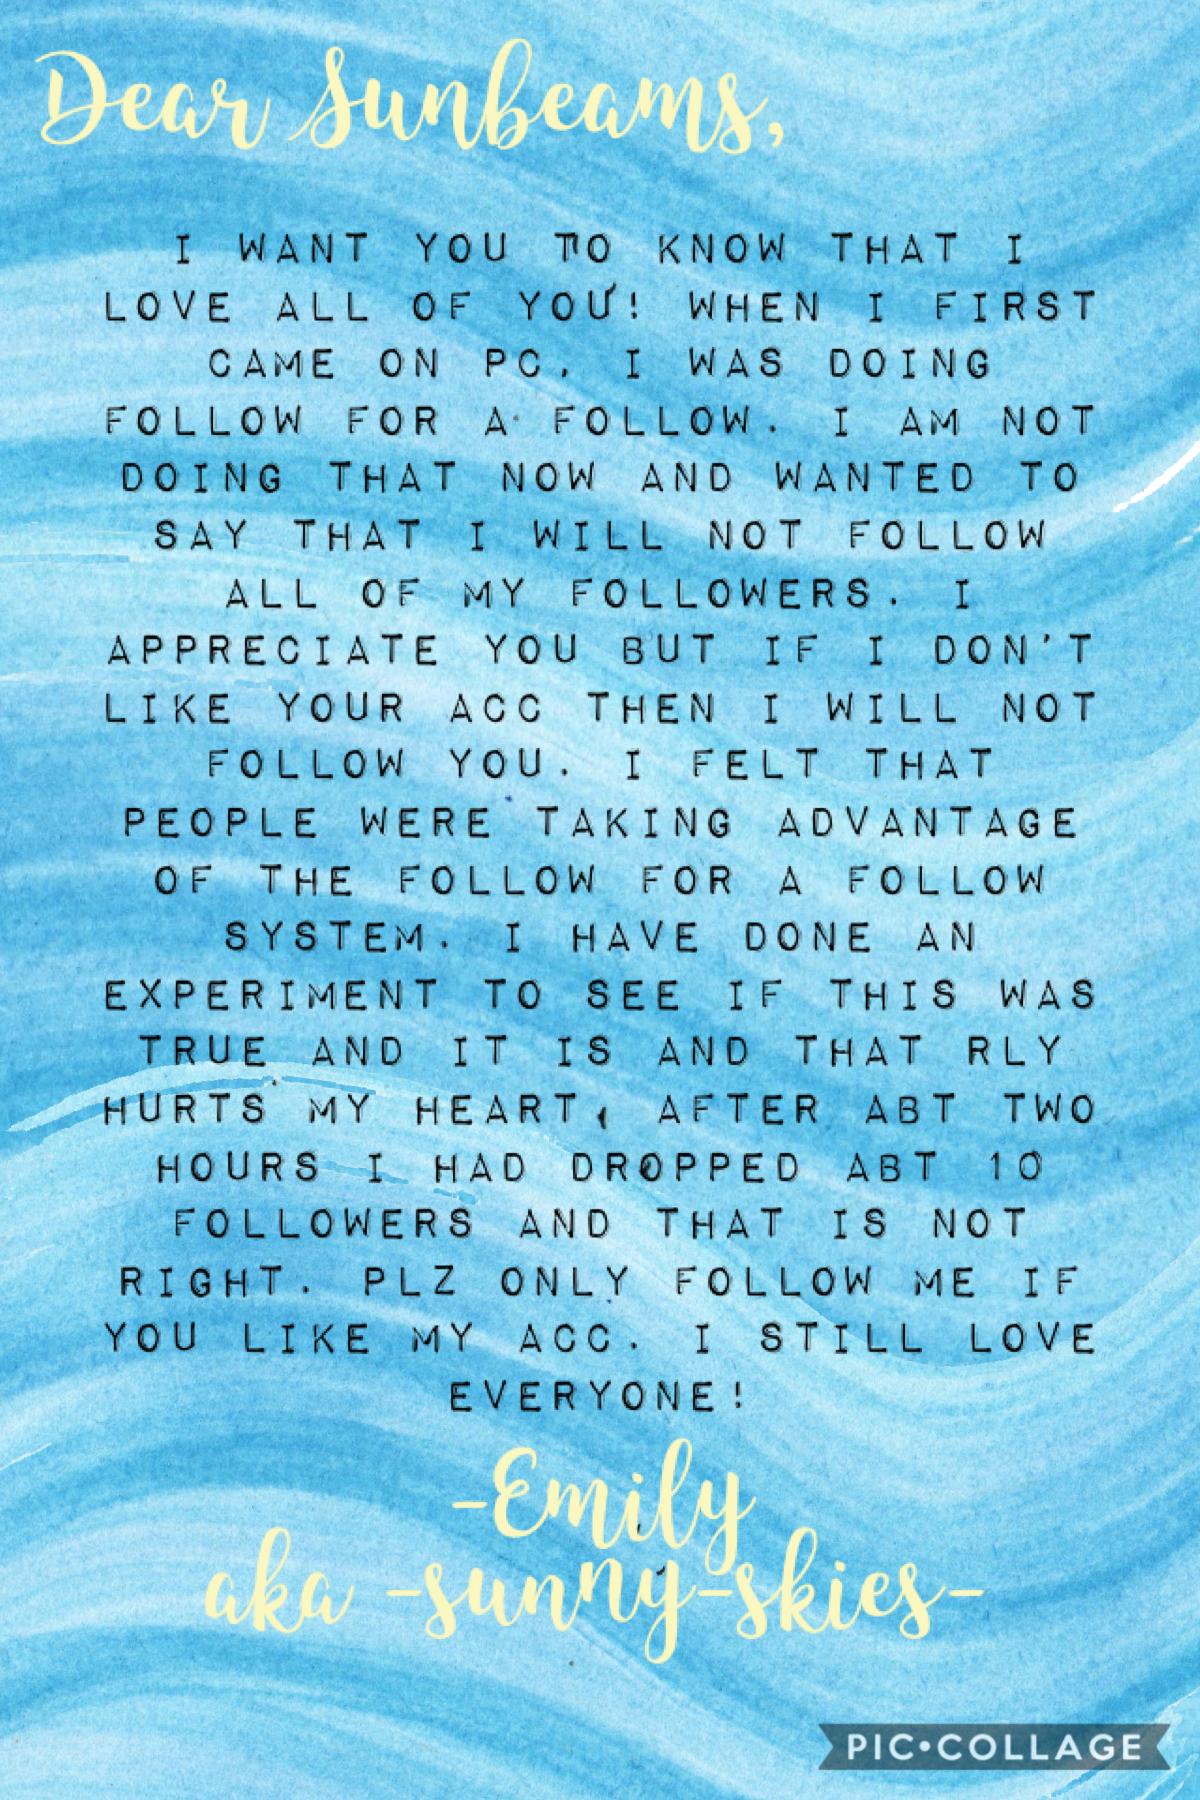 Plz read all of this. It is very important and I know some of you follow me bc you think my acc is cute but i know some don’t. So plz read. 